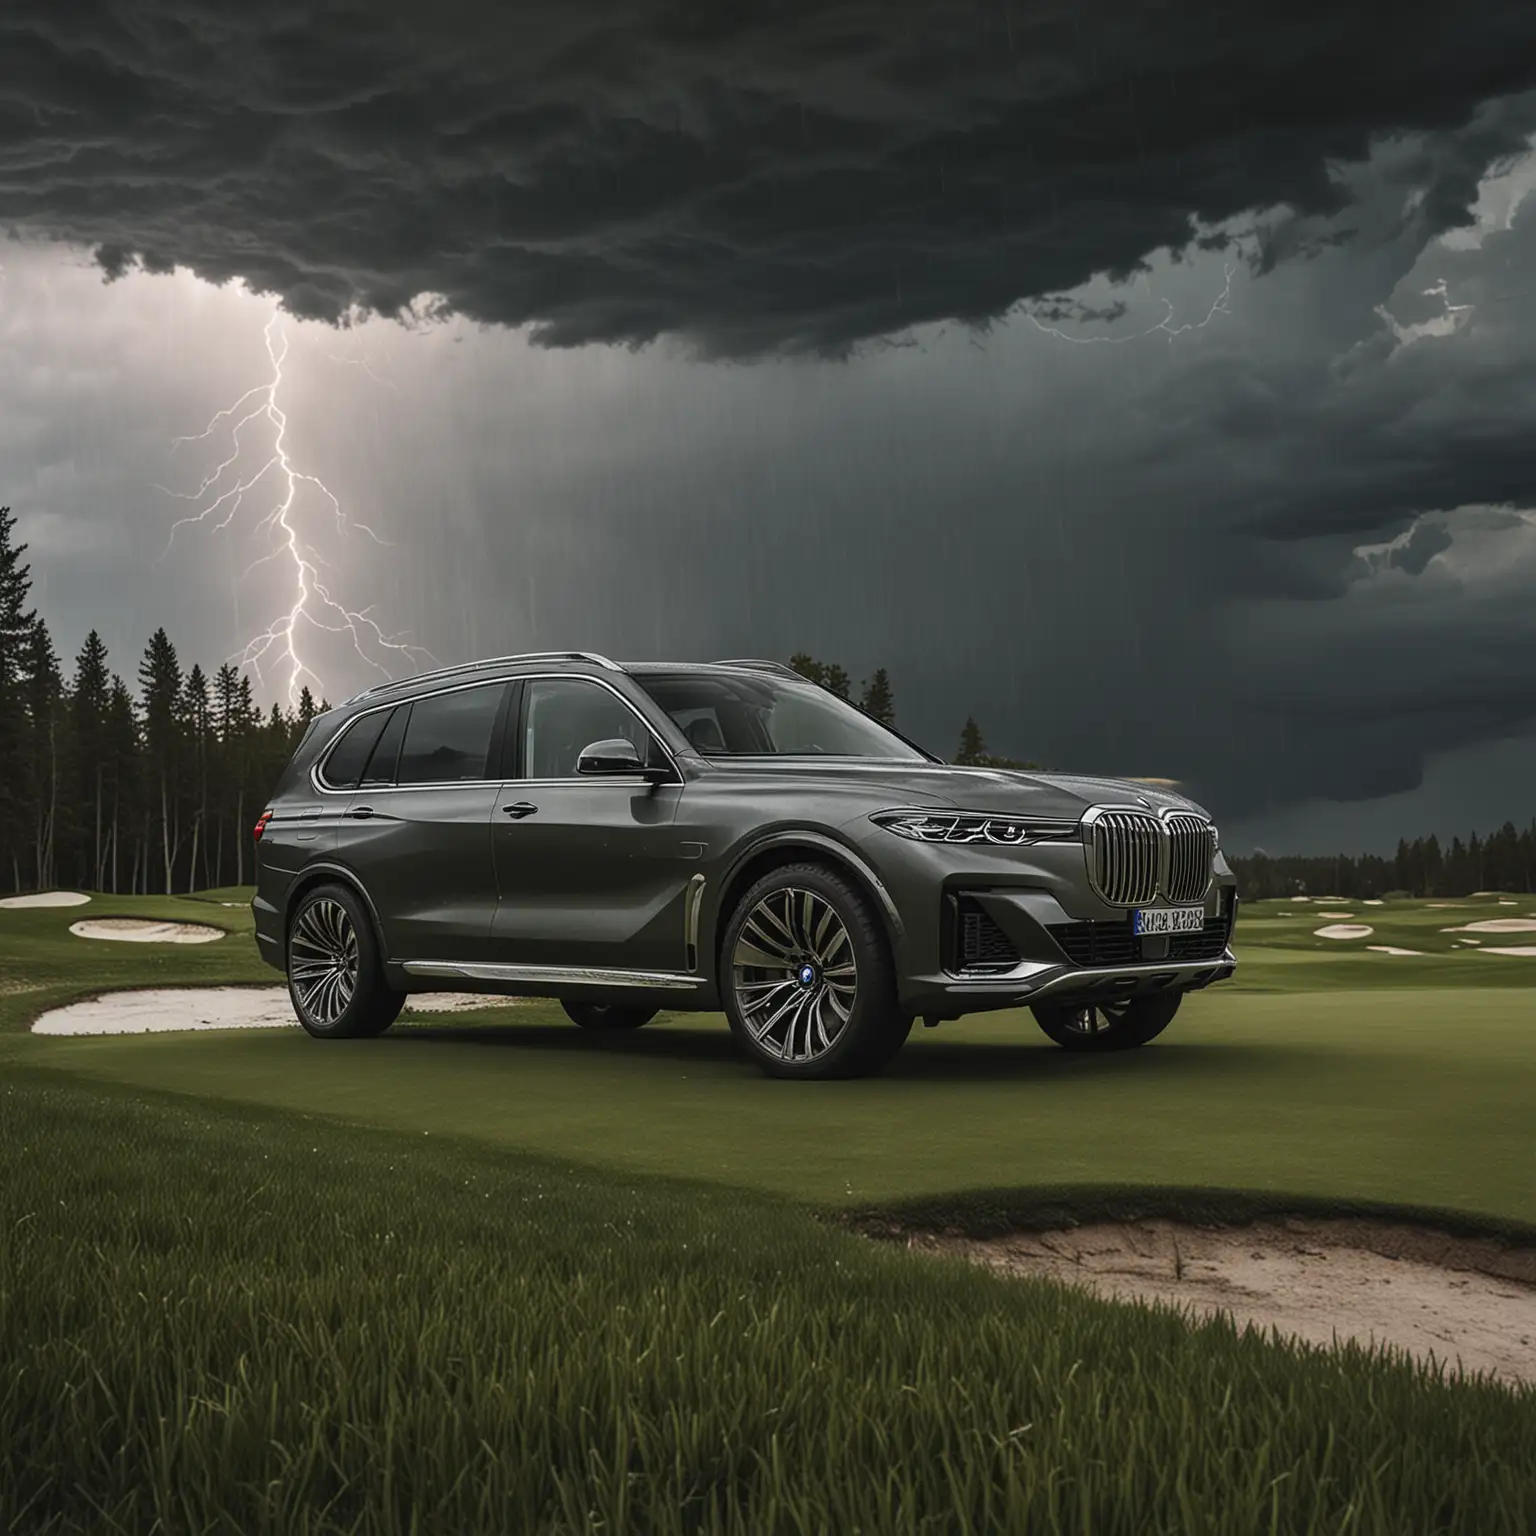 Luxury SUV Driving through Stormy Golf Course